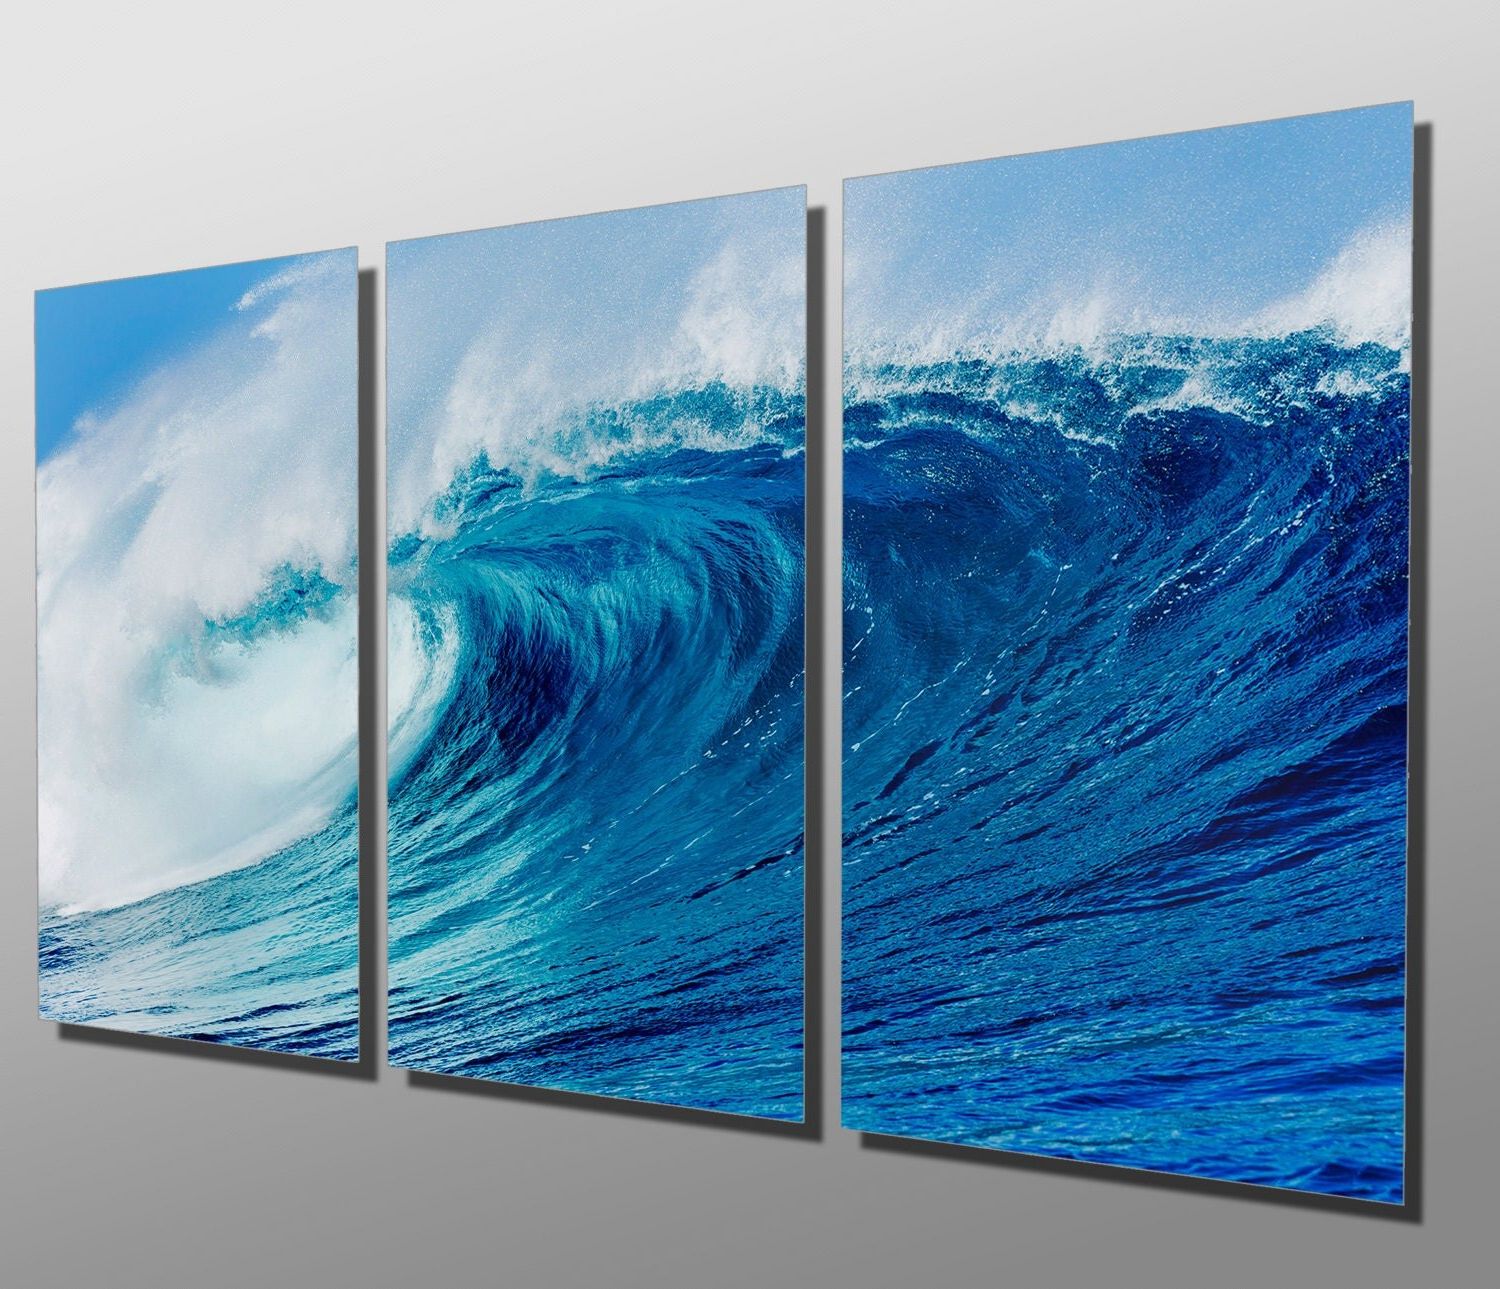 Metal Prints Blue Ocean Wave 3 Panel Split Triptych Intended For Most Up To Date Ocean Waves Metal Wall Art (View 1 of 15)